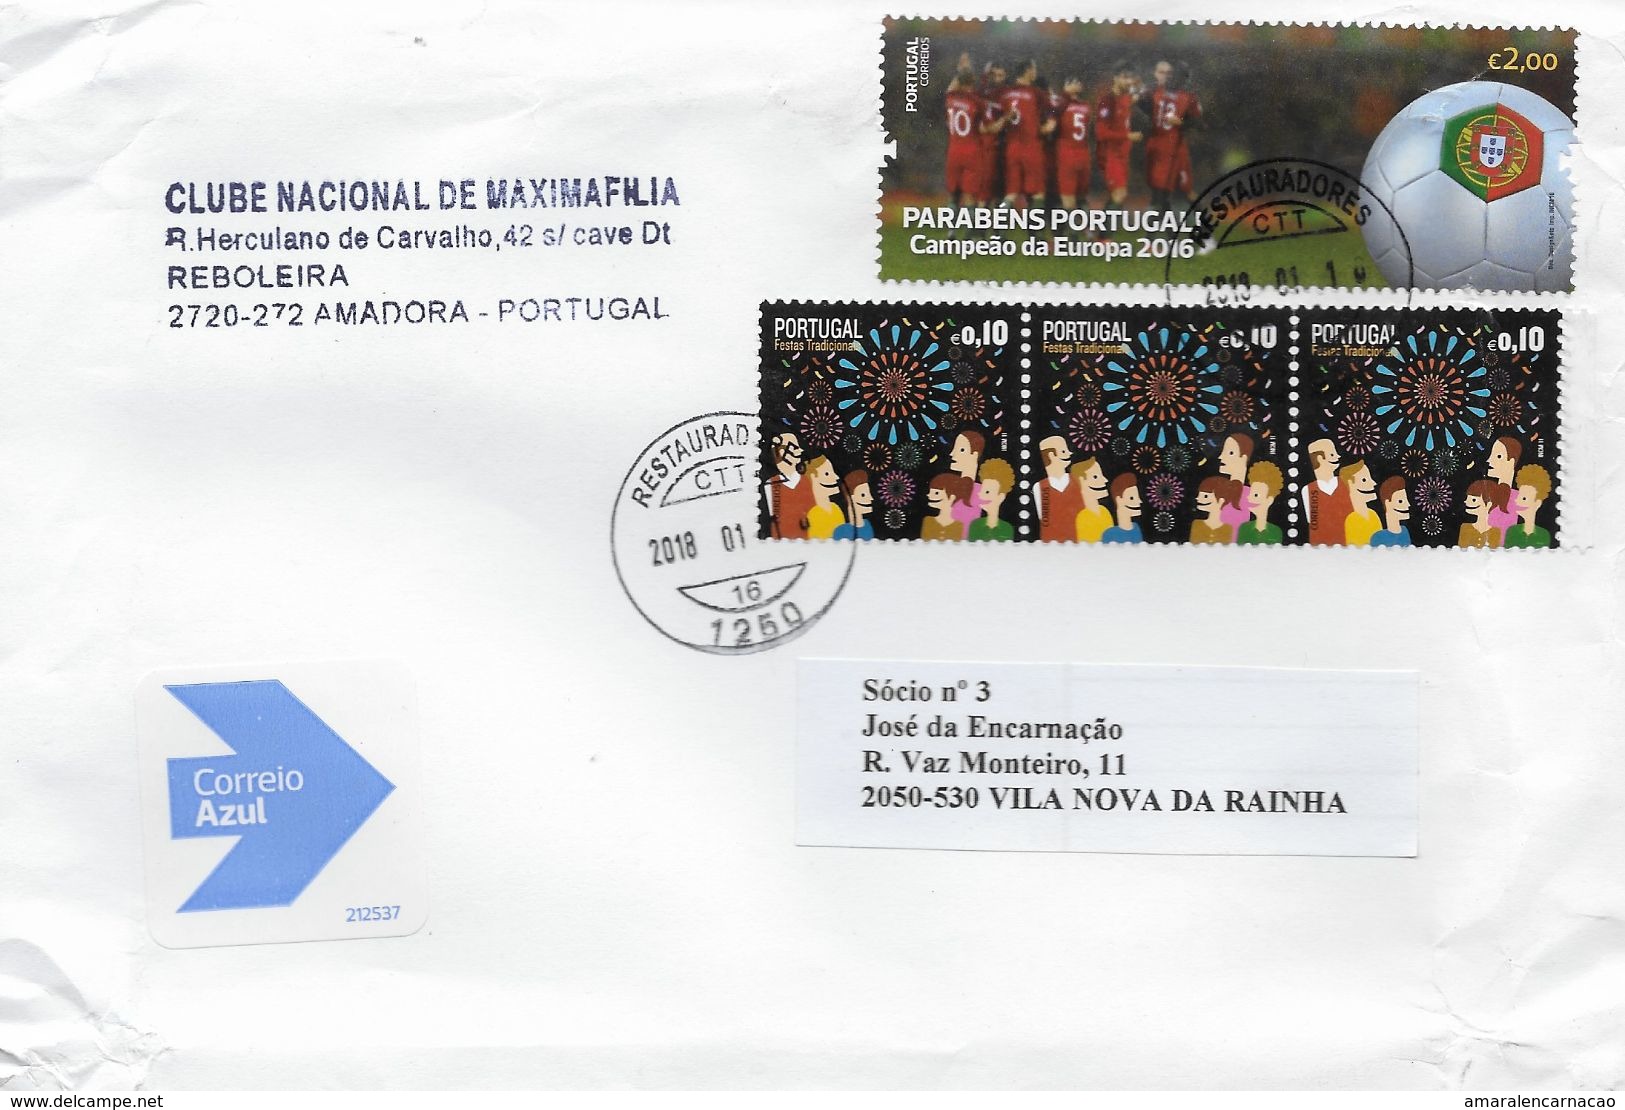 TIMBRES - STAMPS - LETTRE POST BLEU - PORTUGAL - FÉLICITATIONS PORTUGAL - CHAMPION D' EUROPE DE FOOTEBALL 2016 - Lettres & Documents